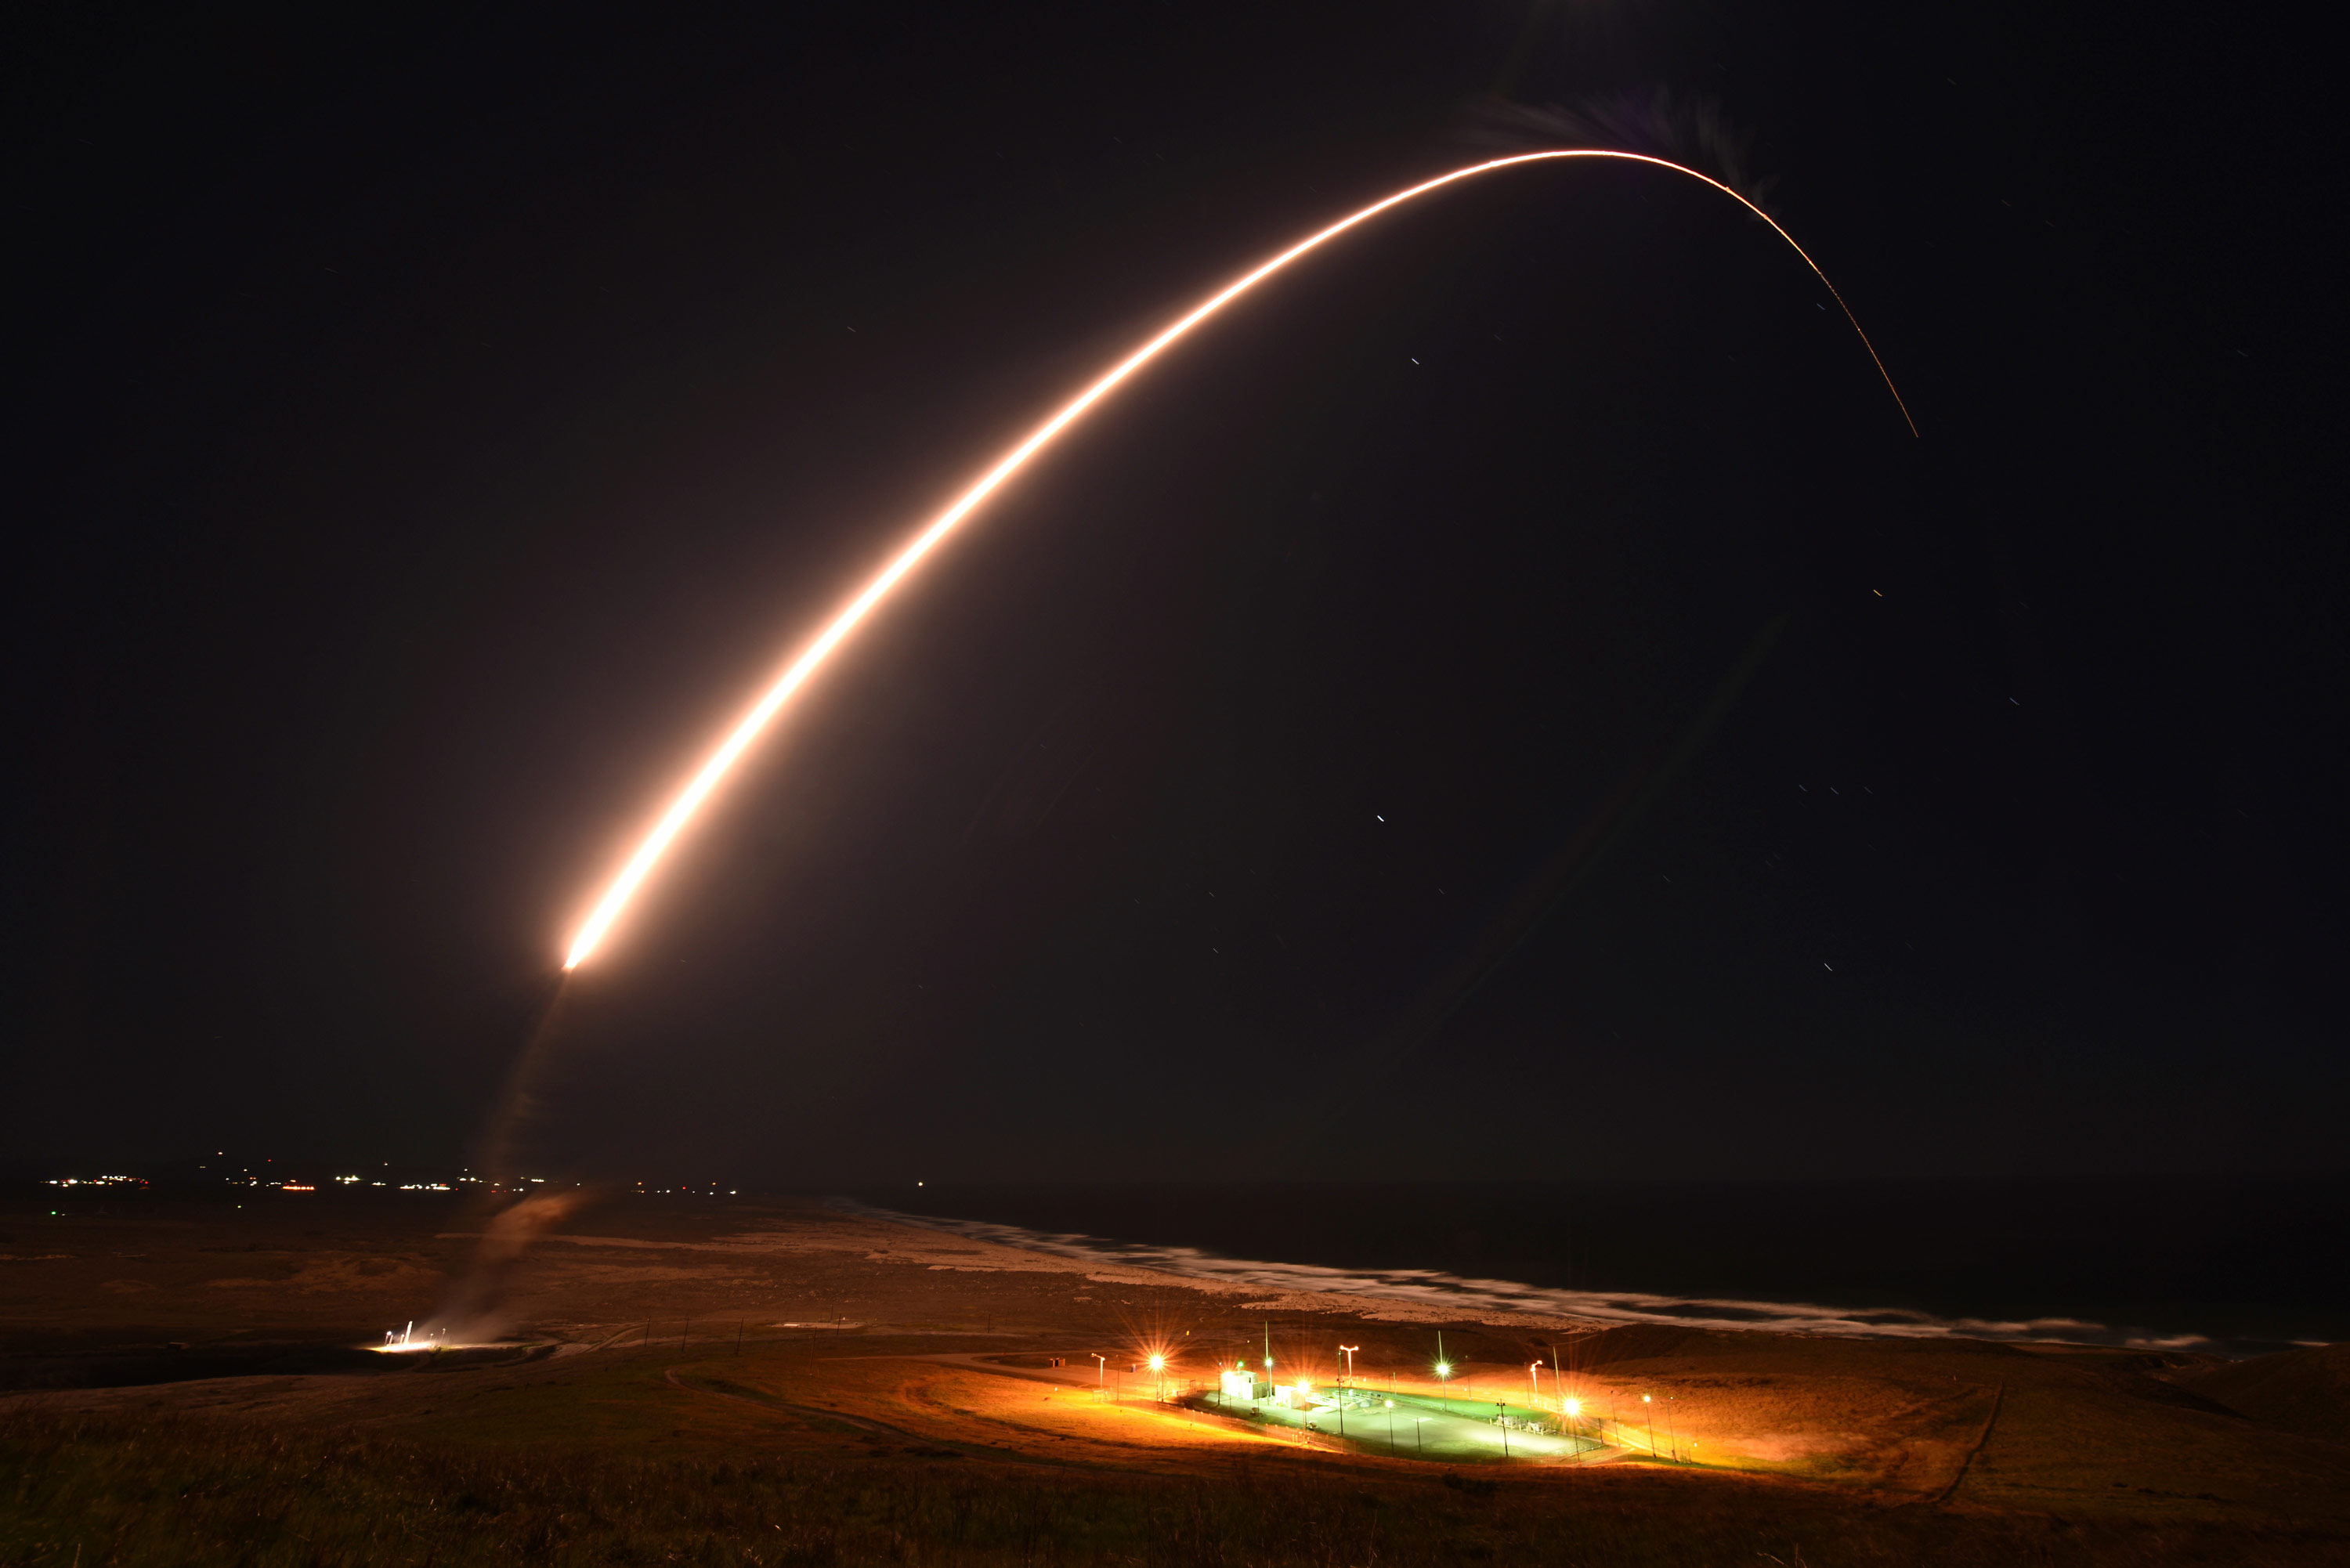 In this photo released by the U.S. Army Space and Missile Defense Command, an unarmed Minuteman 3 intercontinental ballistic missile launches during an operation test at Vandenberg Air Force Base, California, on Tuesday, February 23, 2021.